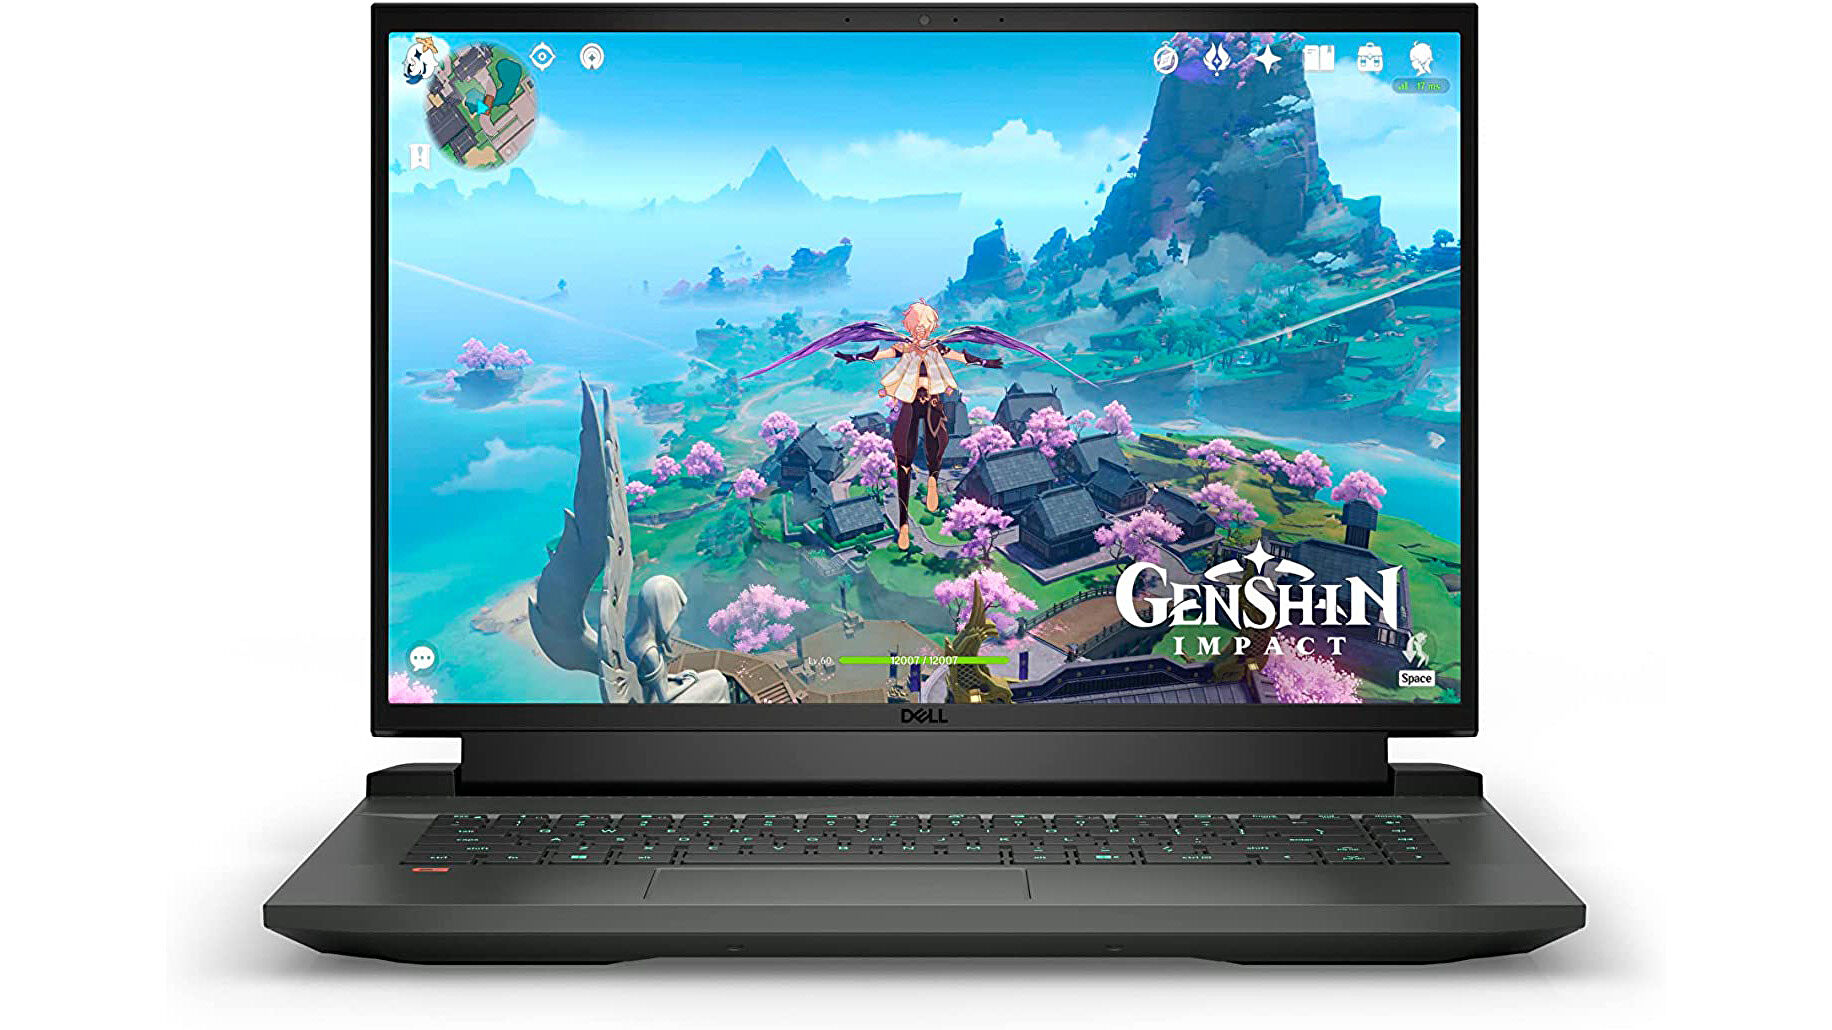 This Core i9 Dell gaming laptop is down to $1169.99 after a $1030 discount